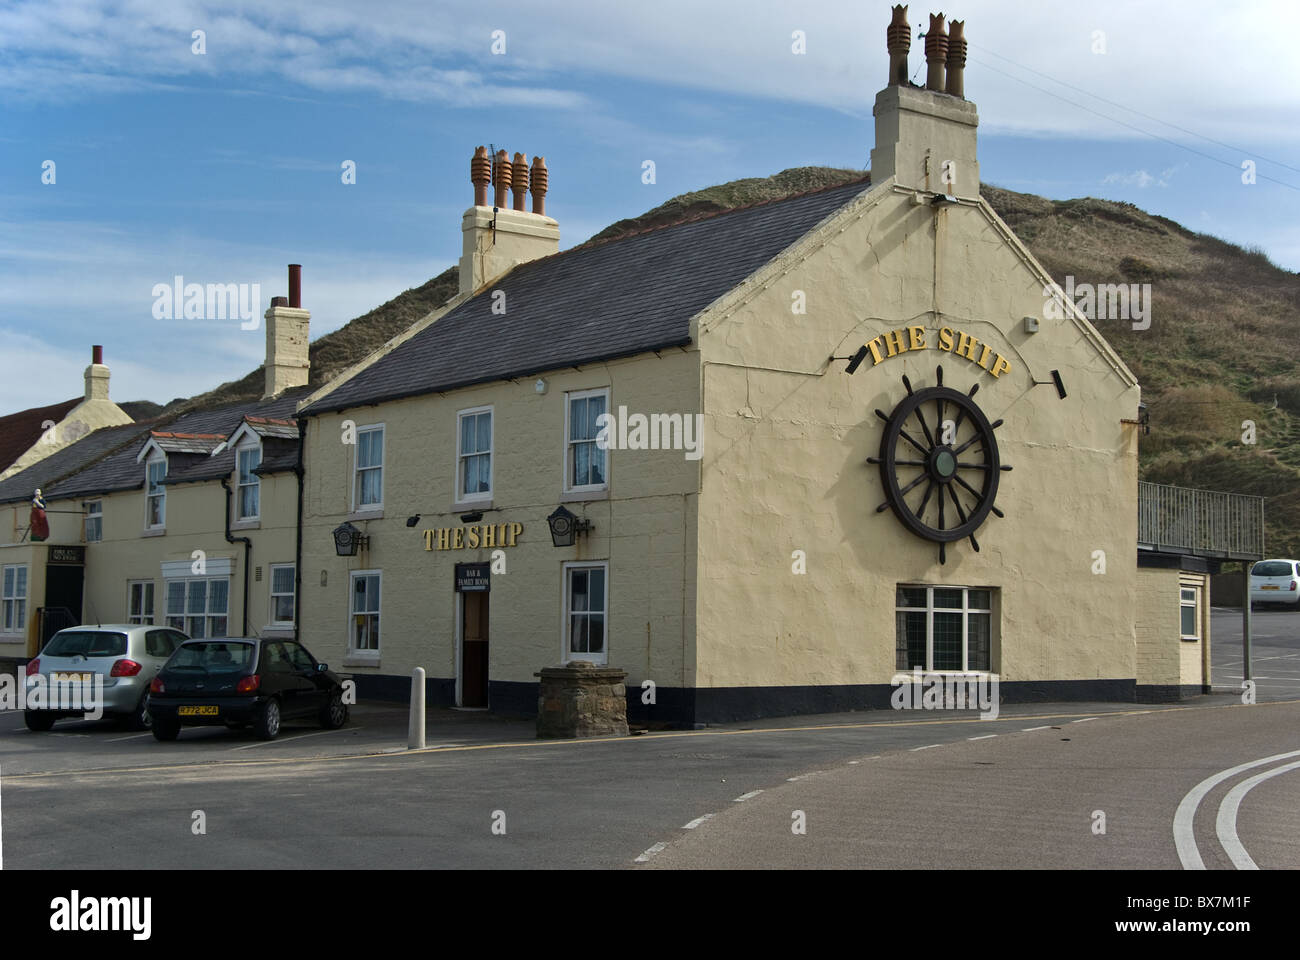 The Ship Inn at Saltburn-by-the-Sea, North Yorkshire, UK. Stock Photo